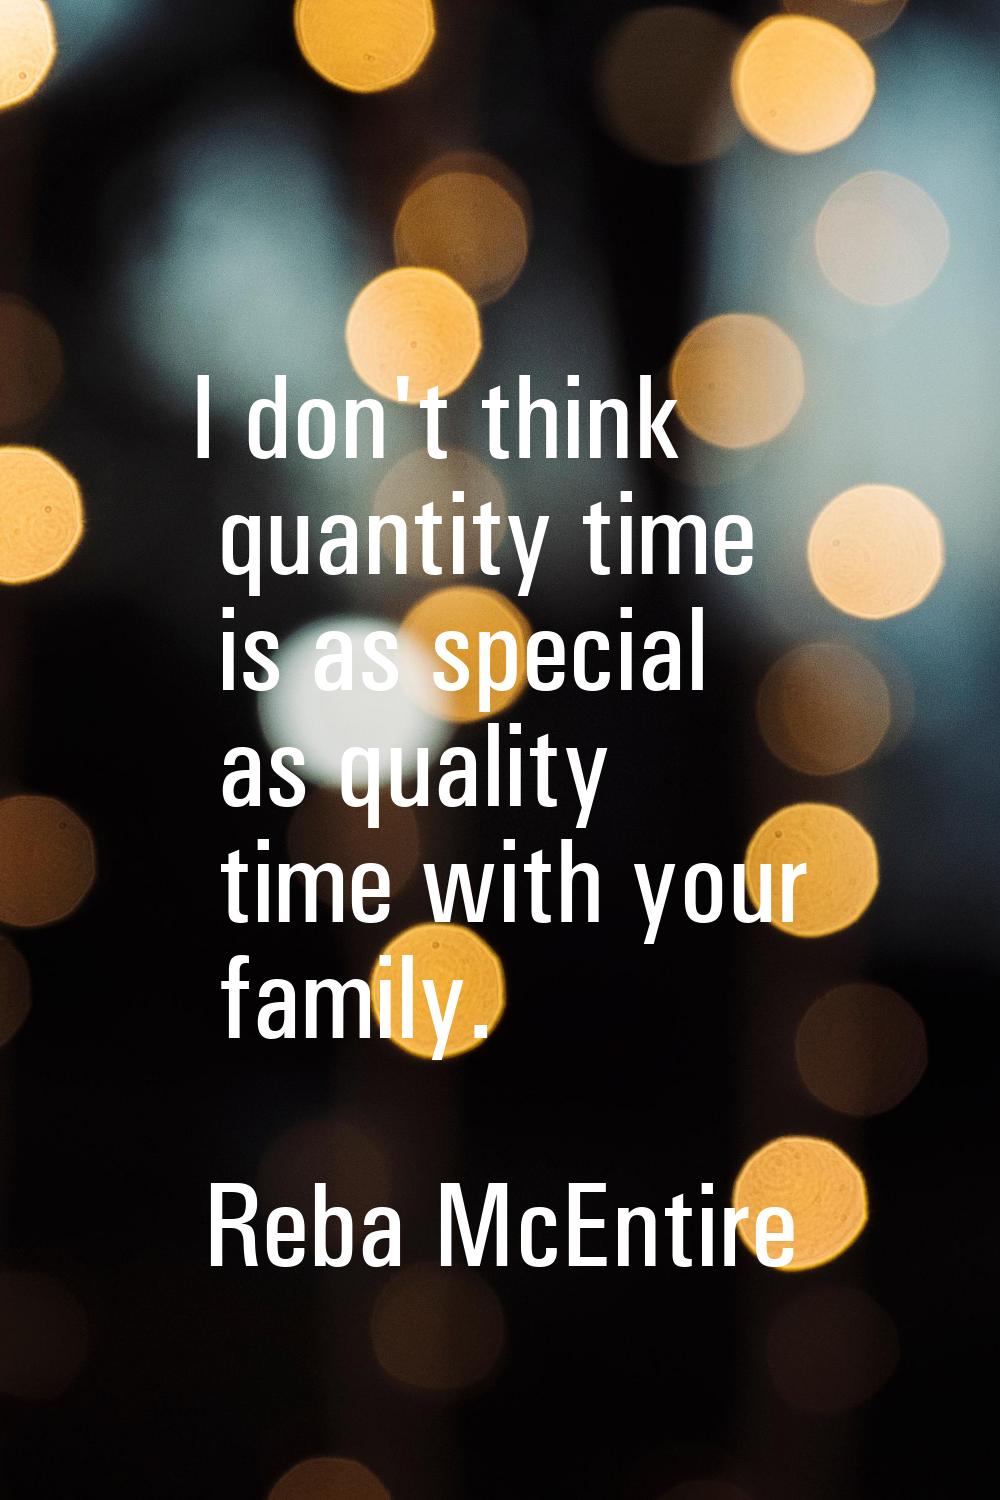 I don't think quantity time is as special as quality time with your family.